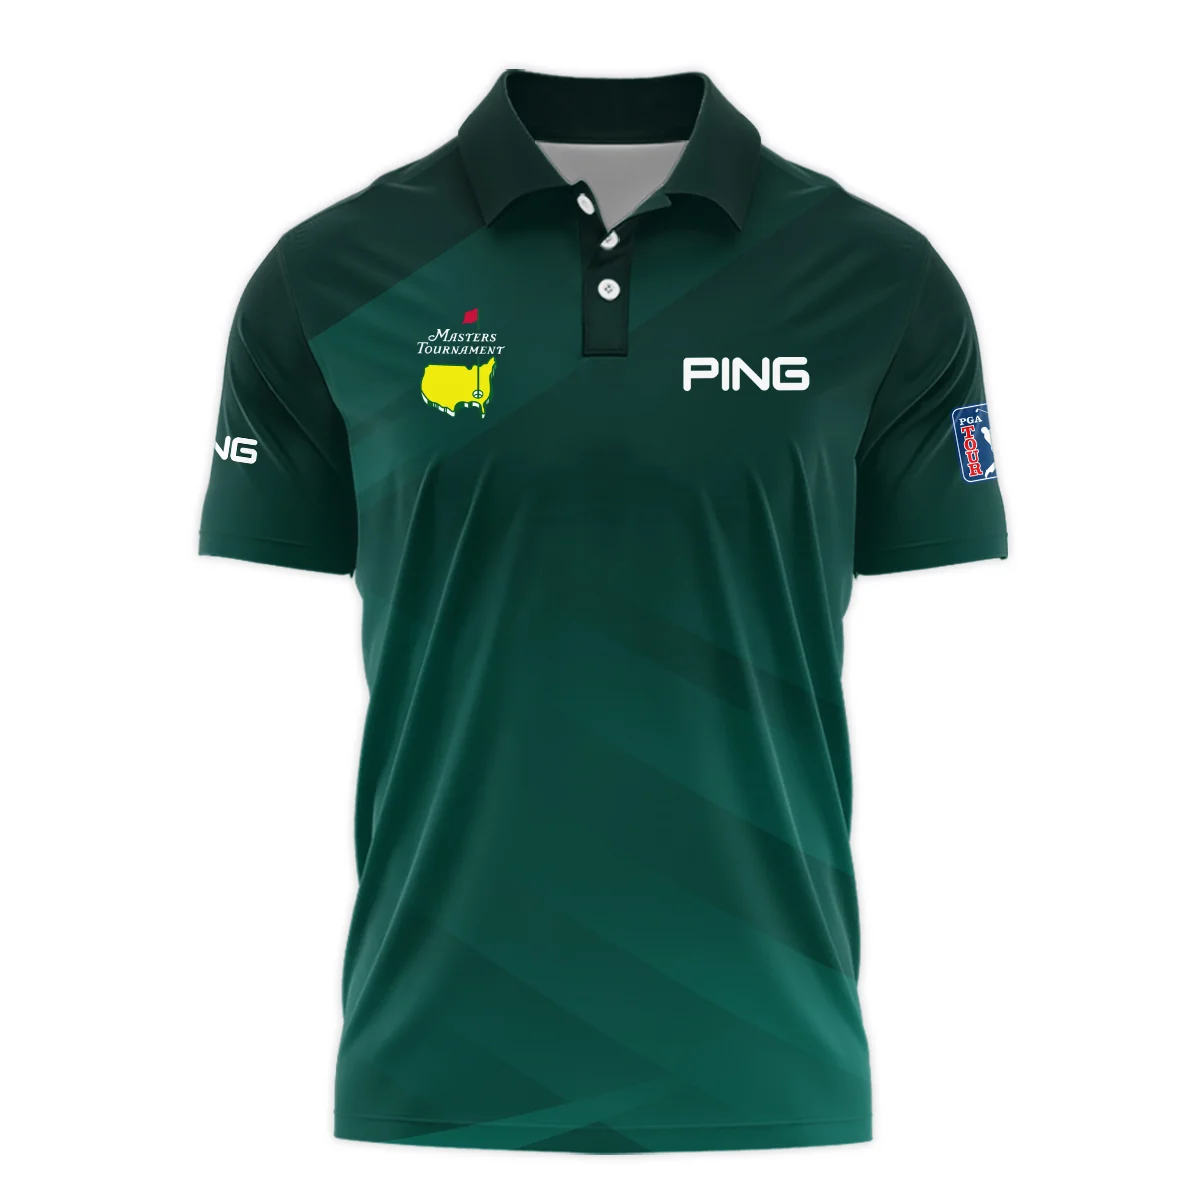 Masters Tournament Dark Green Gradient Golf Sport Ping Long Polo Shirt Style Classic Long Polo Shirt For Men